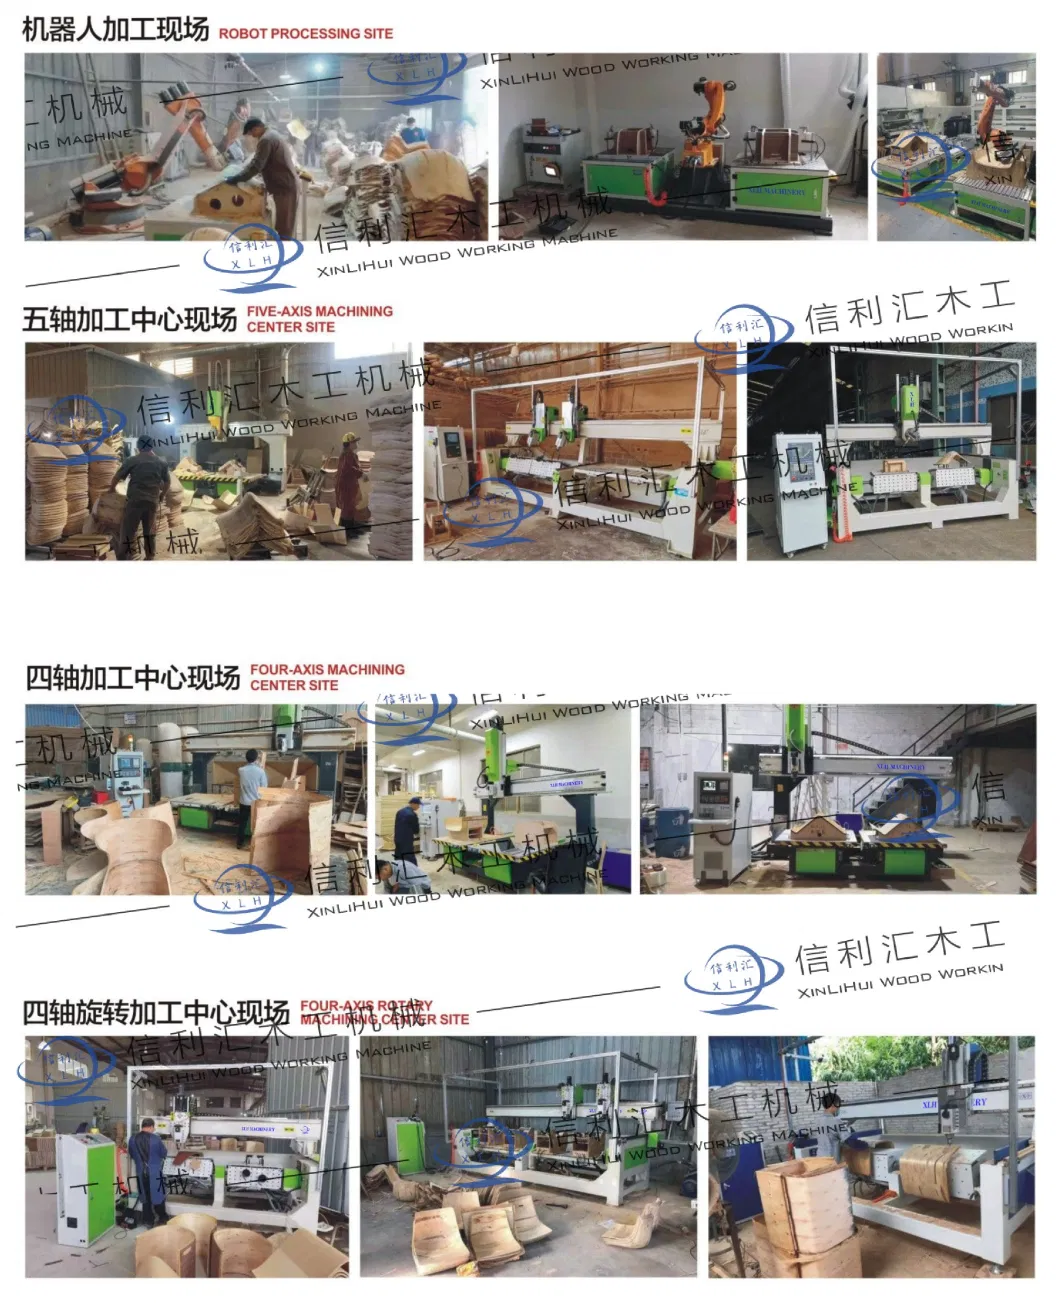 Router CNC Wood 5 Axis EPS Foam Molding Machine for Sale 12 Knife Changing Machine Automatic Loading and Unloading Cutting Machine